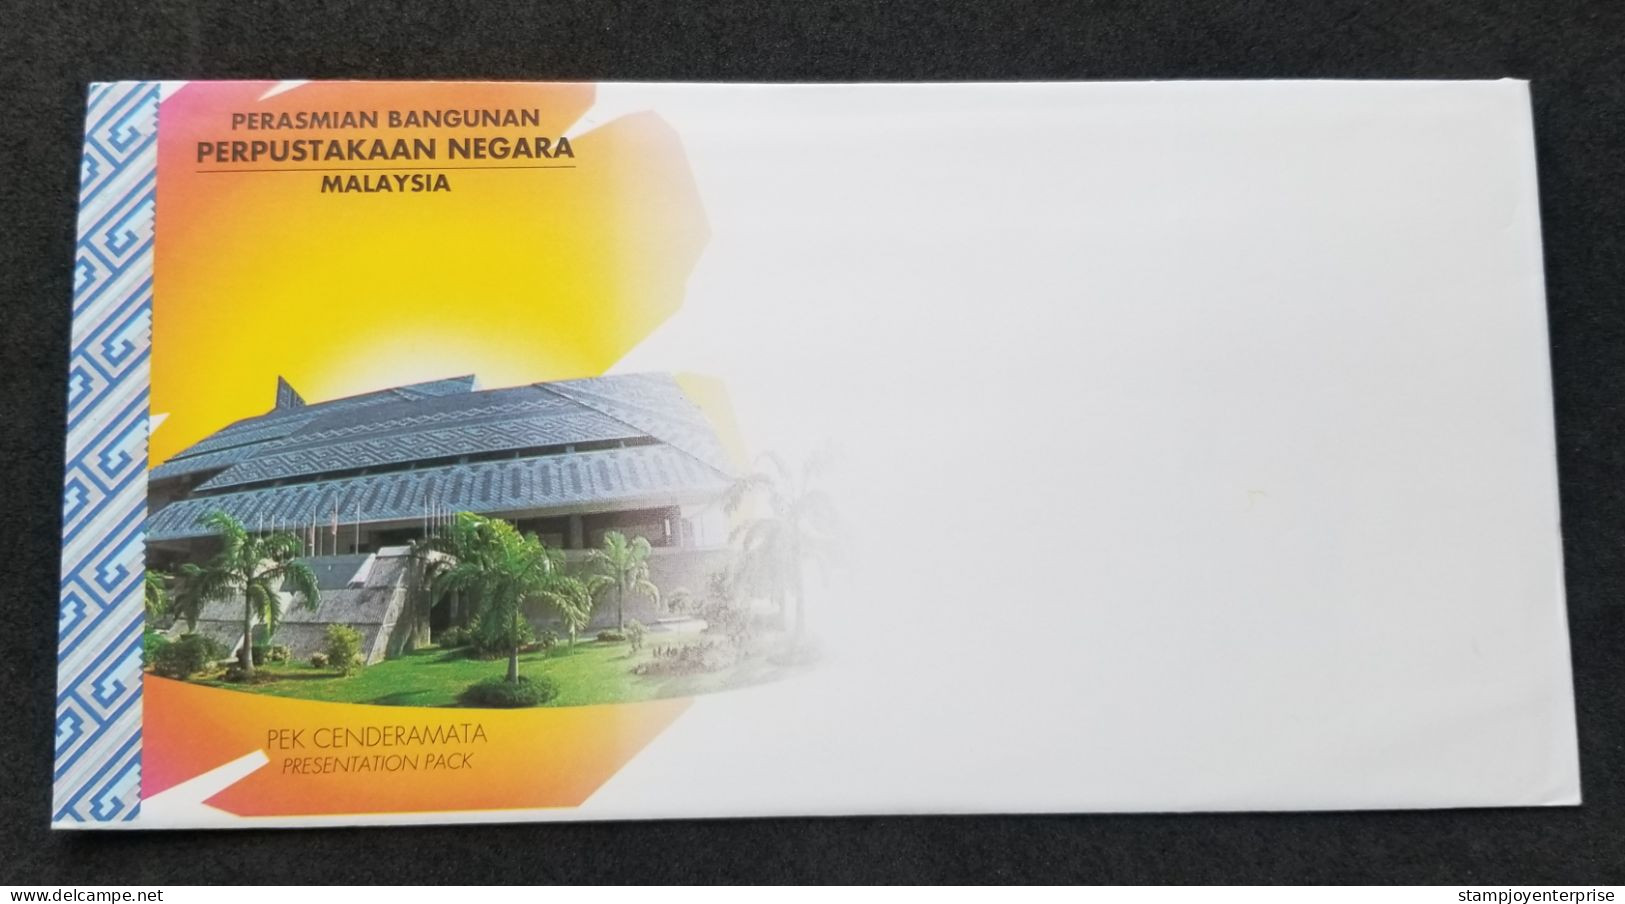 Malaysia Official Opening Of The National Library Building 1994 Computer Book (p. Pack) MNH - Malasia (1964-...)